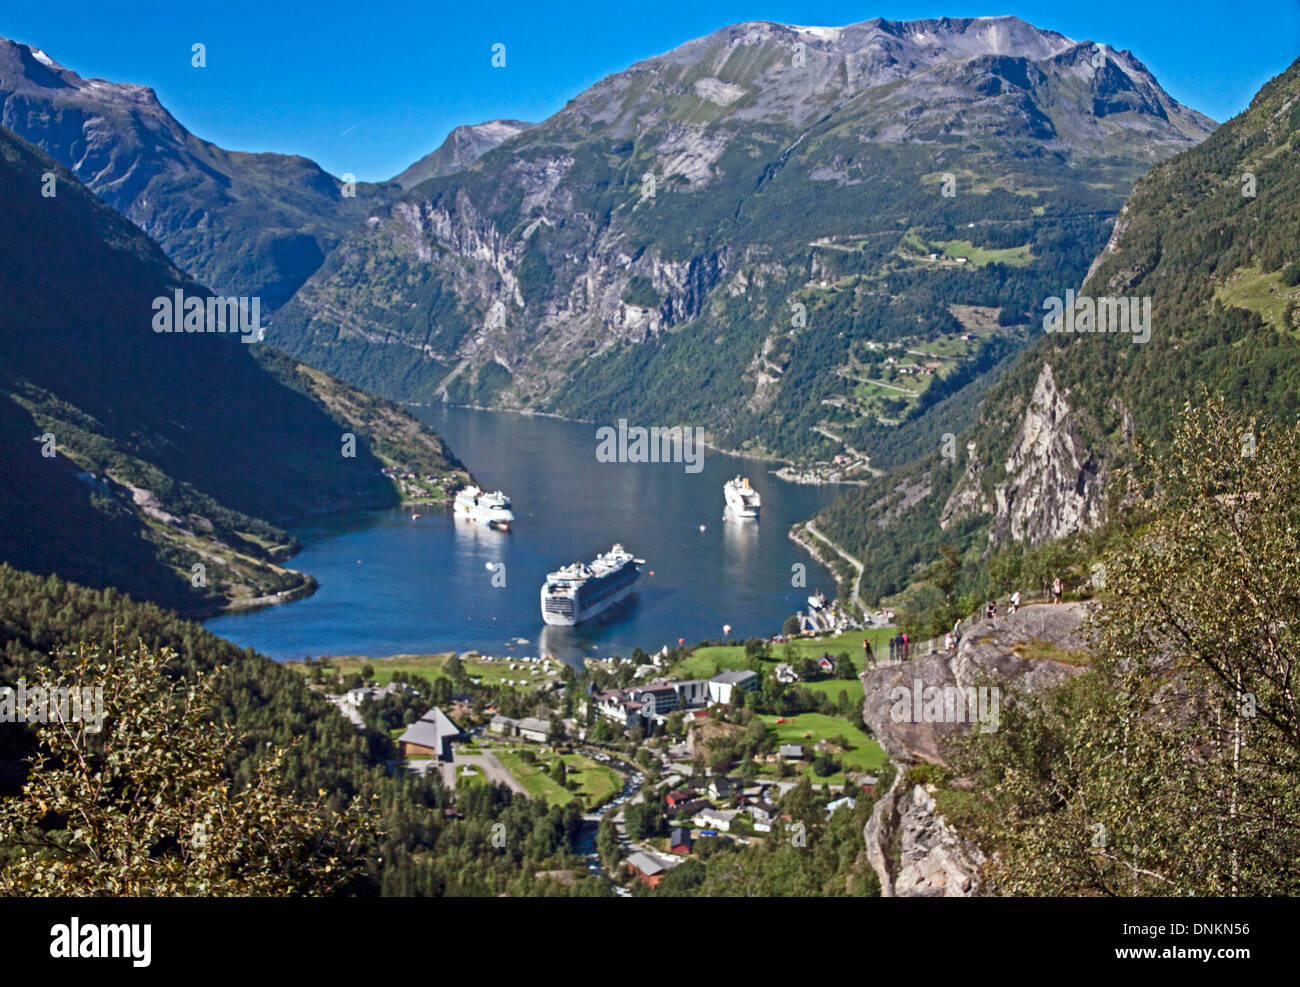 View of Geiranger village and Geirangerfjord from Mount Dalsnibba showing cruise ships, Norway, Scandinavia, Europe Stock Photo